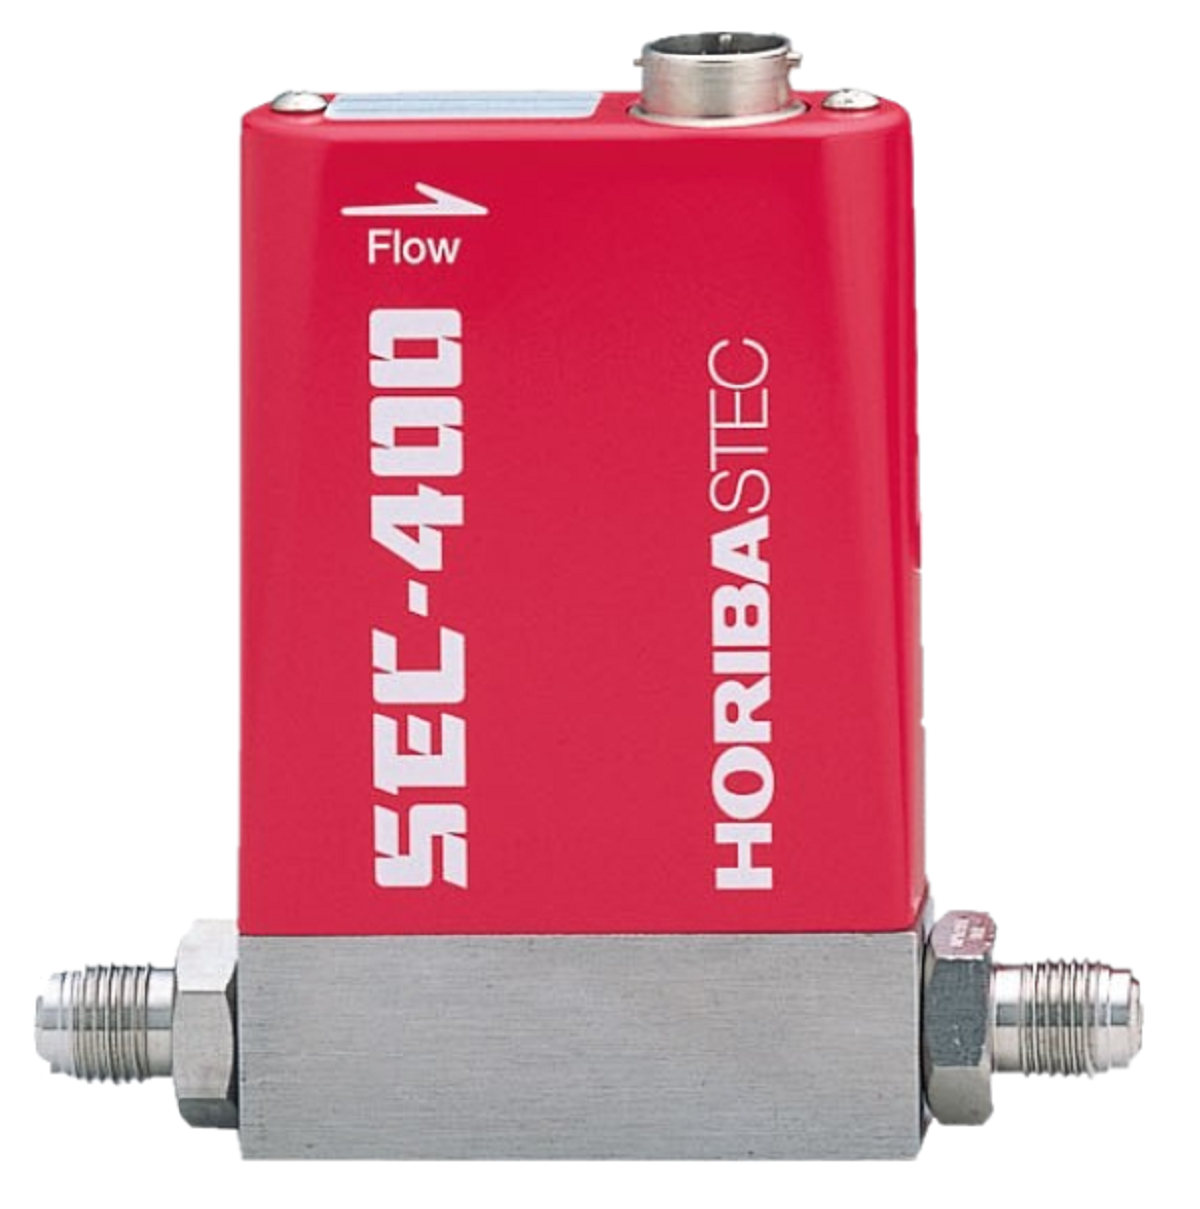 Mass flow controllers SEC-400 series